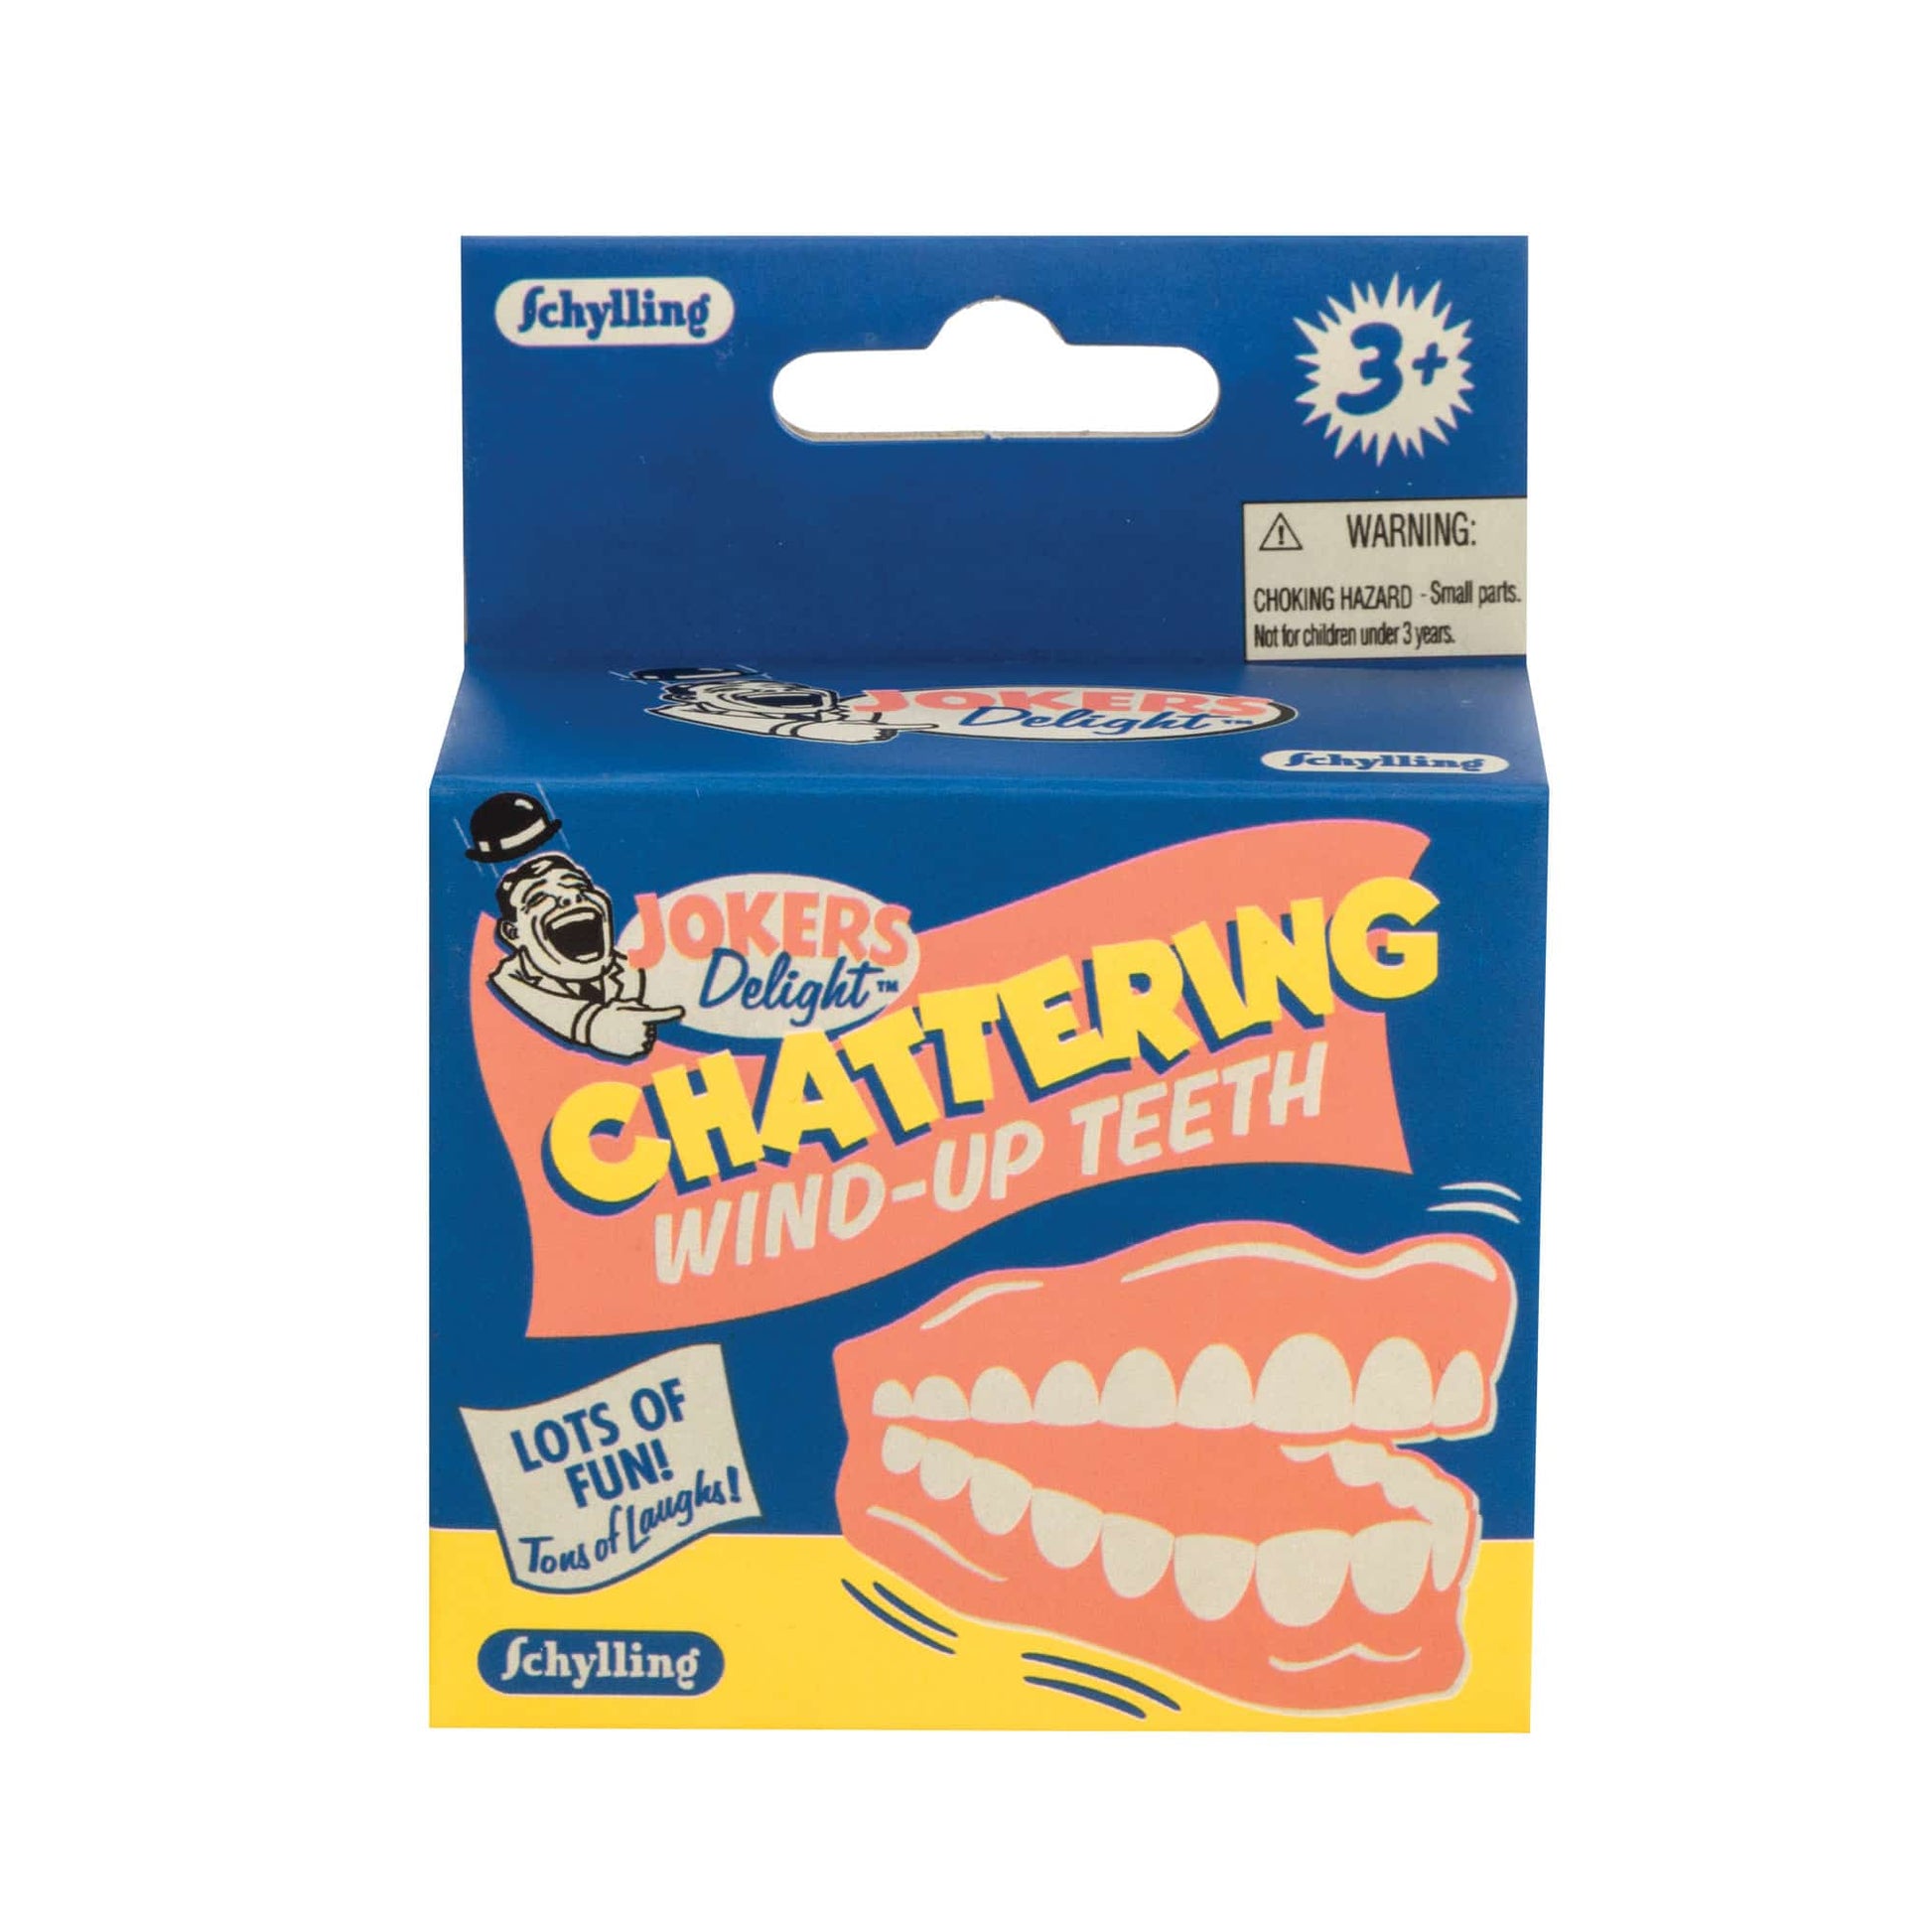 Schylling Chattering Teeth